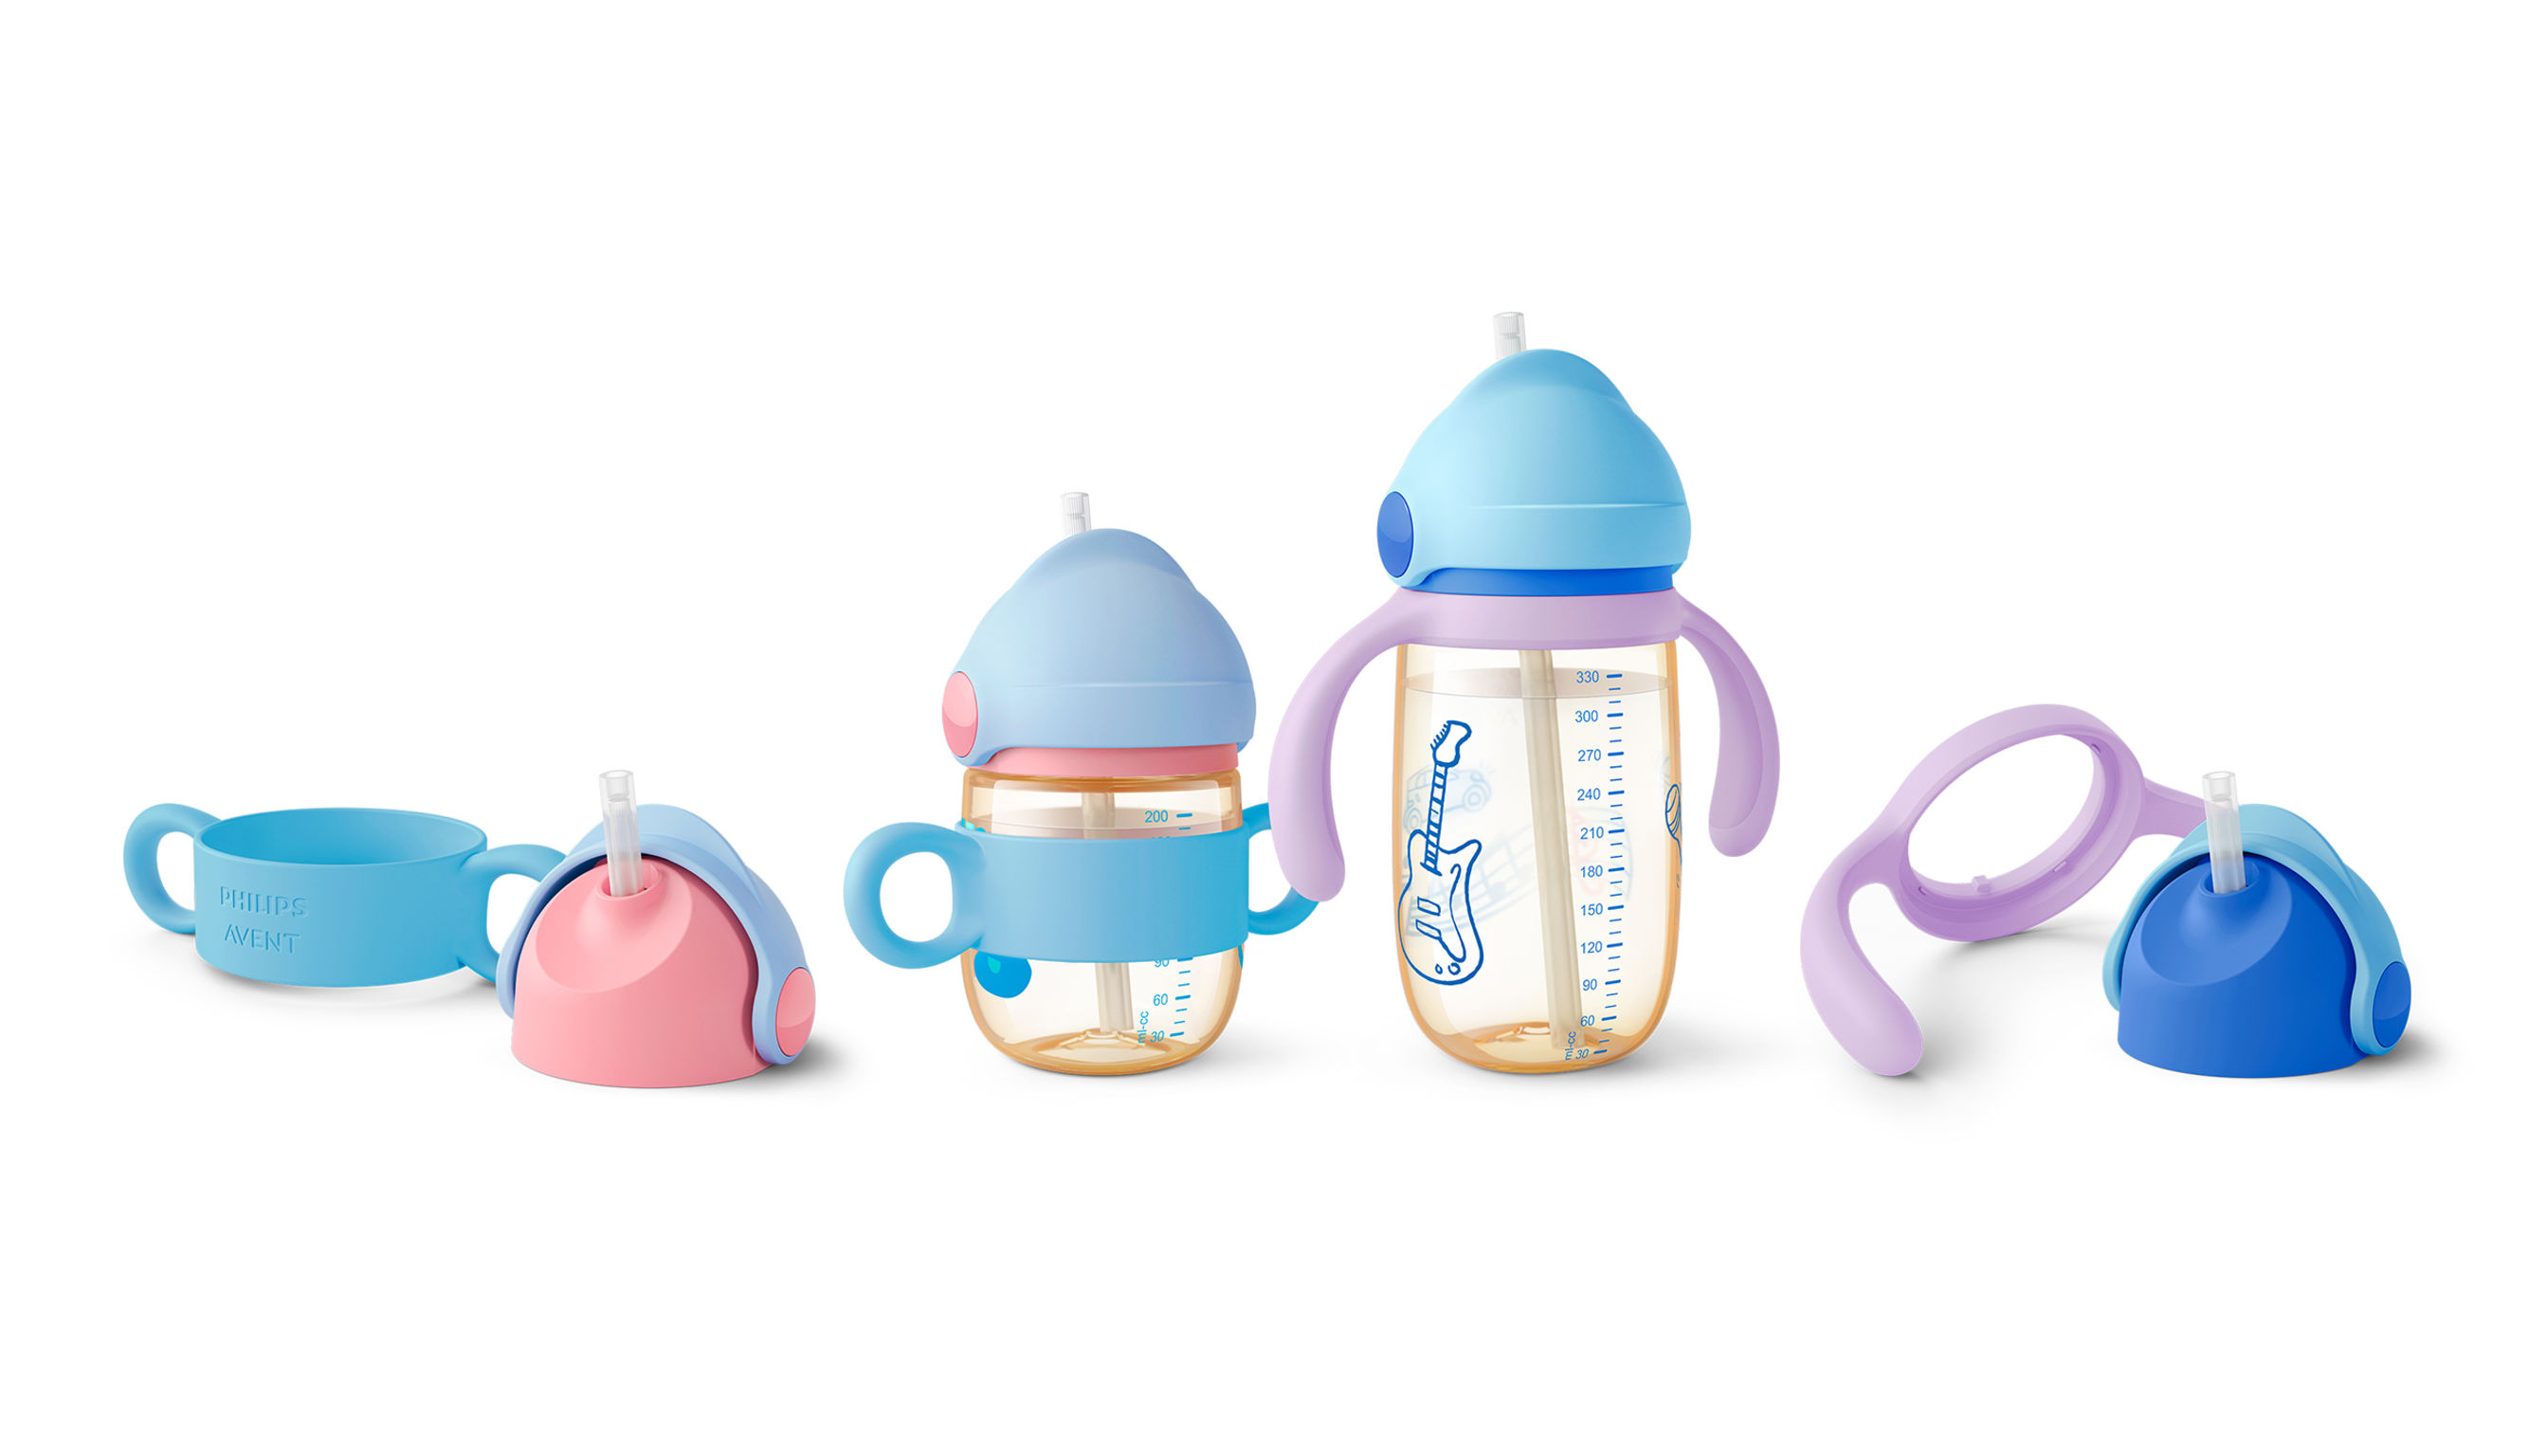 Philips Avent PPSU Straw Cup Series